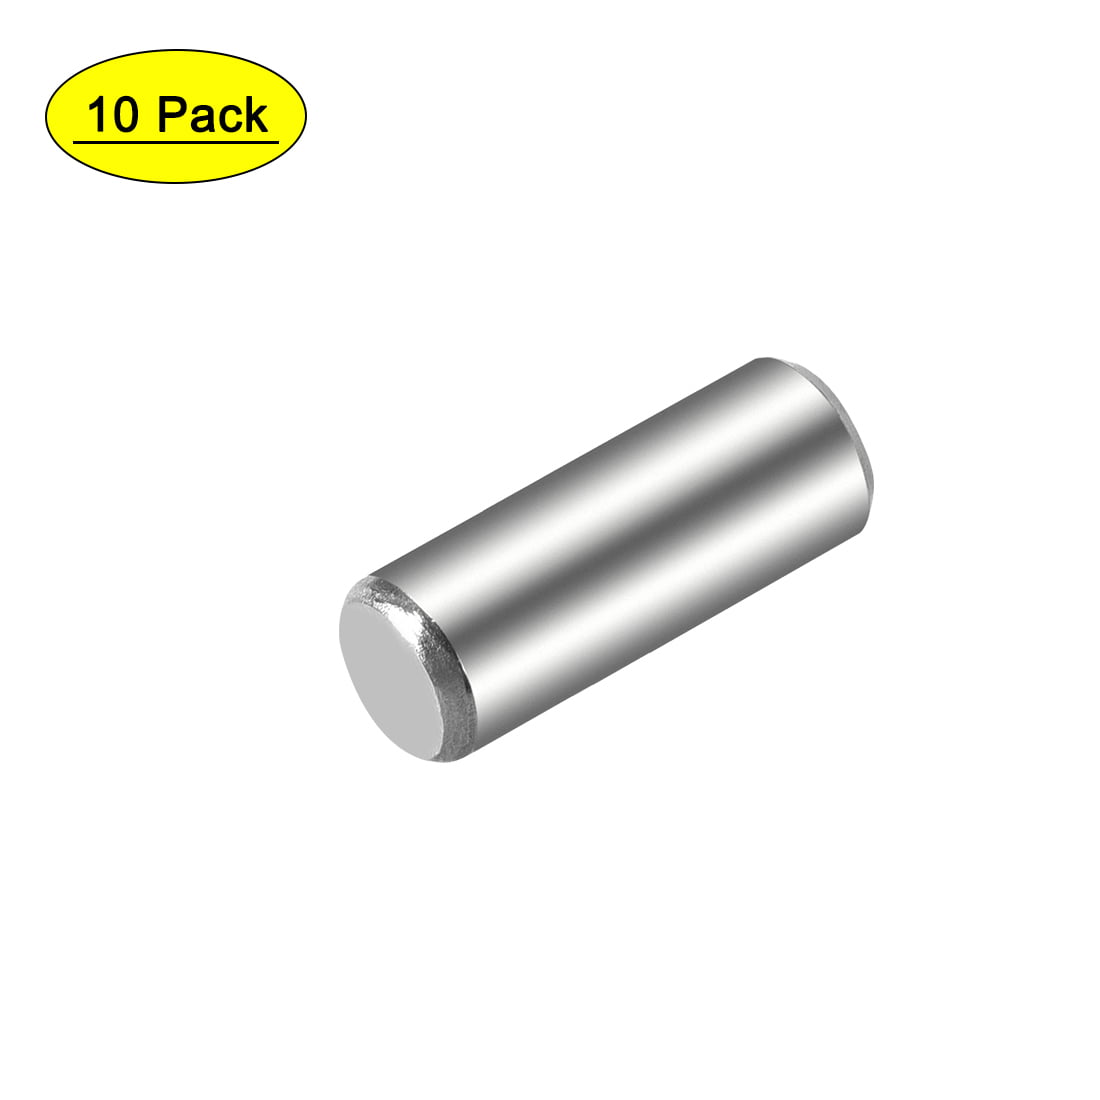 1/8" x 3/8" Dowel Pin Hardened And Ground Alloy Steel Bright Finish 